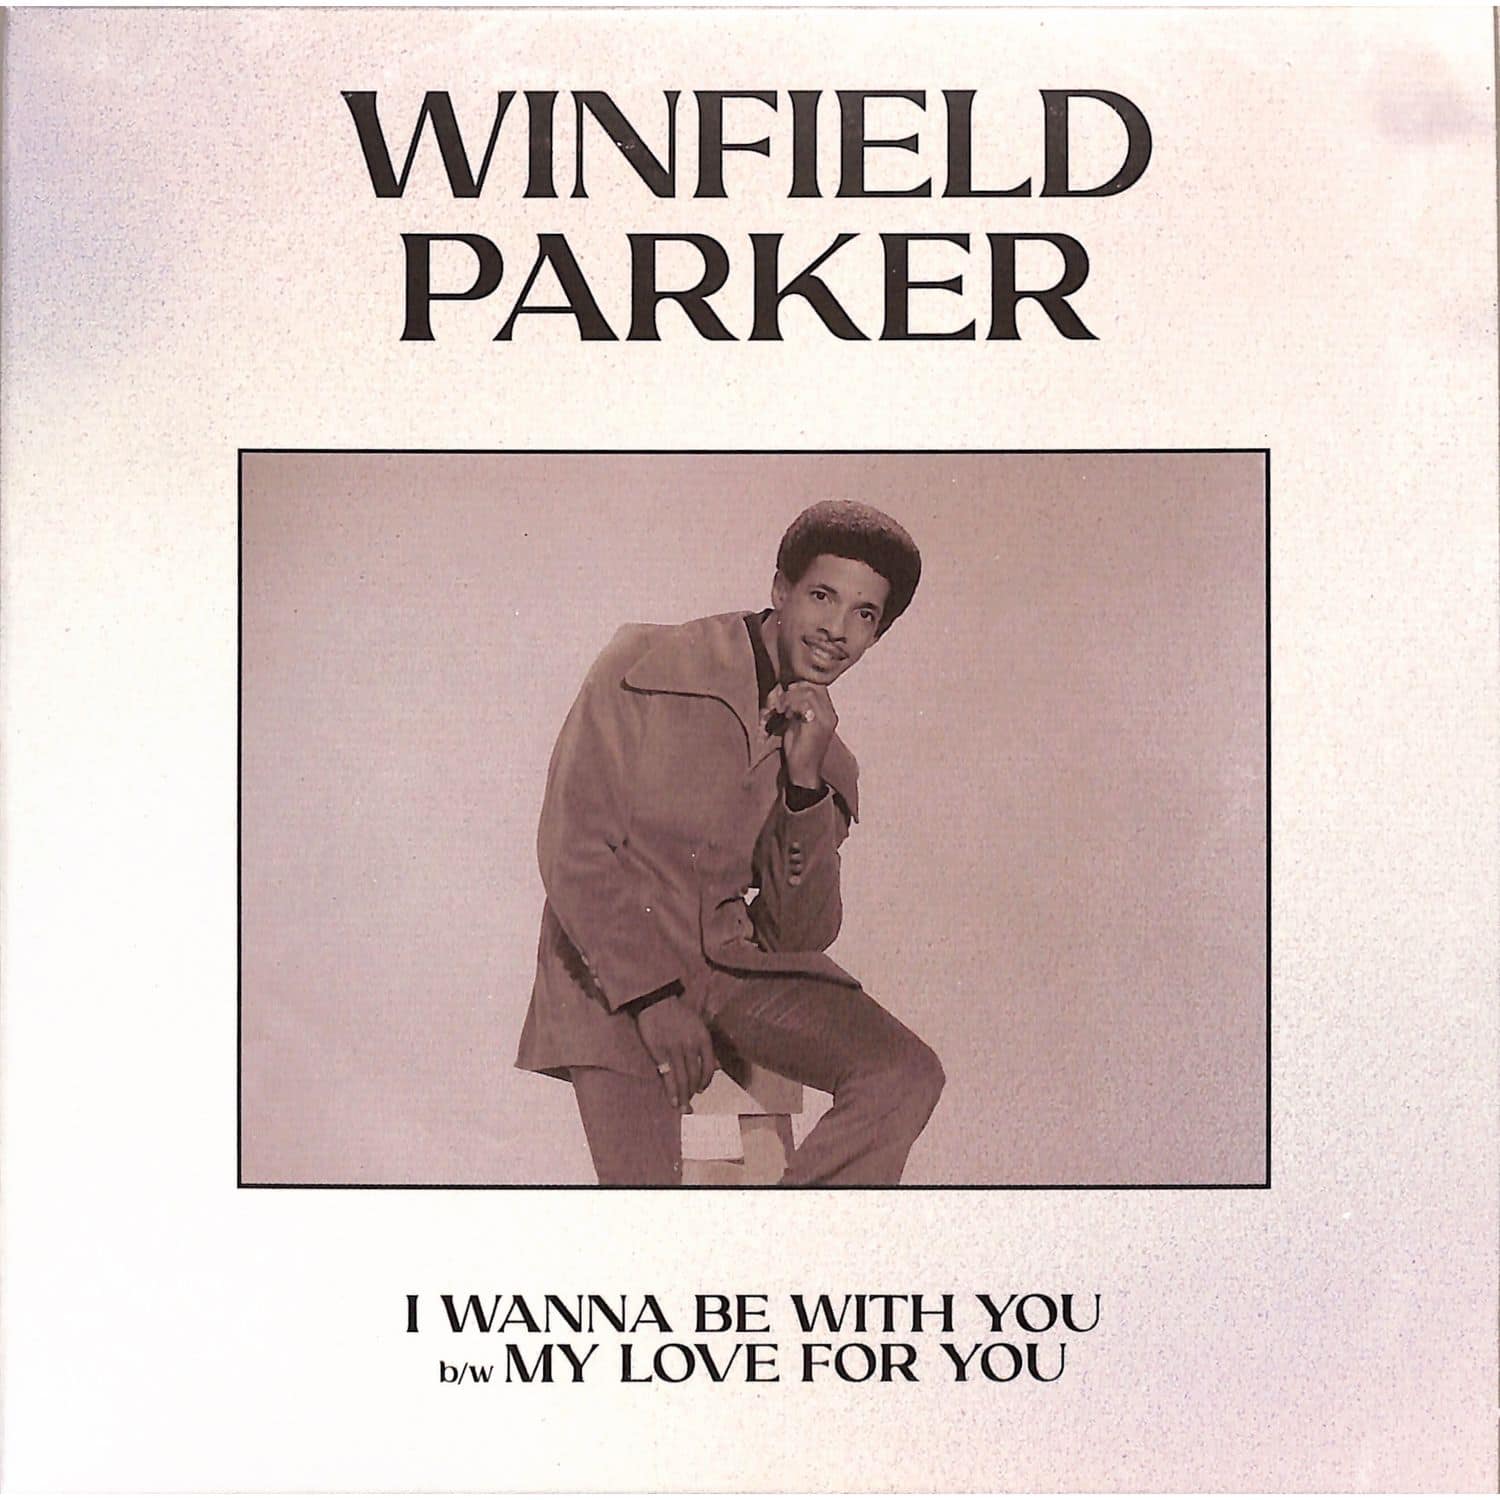 Winfield Parker - I WANNA BE WITH YOU / MY LOVE FOR YOU 